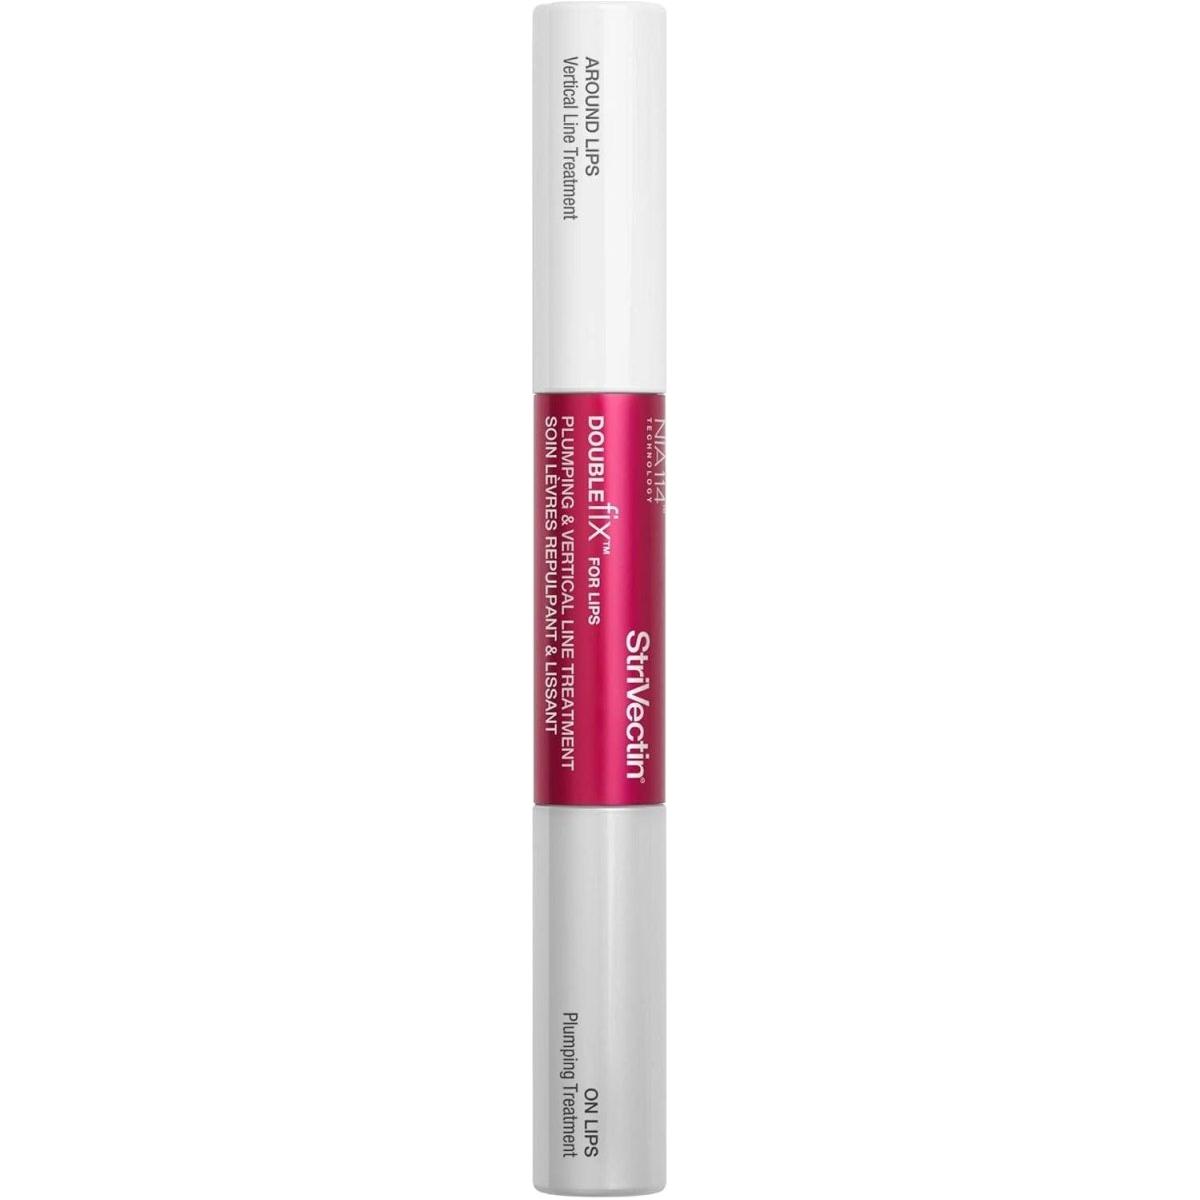 Strivectin Double Fix for Lips Plumping & Vertical Line Treatment - 2.5 ml - Glam Global UK